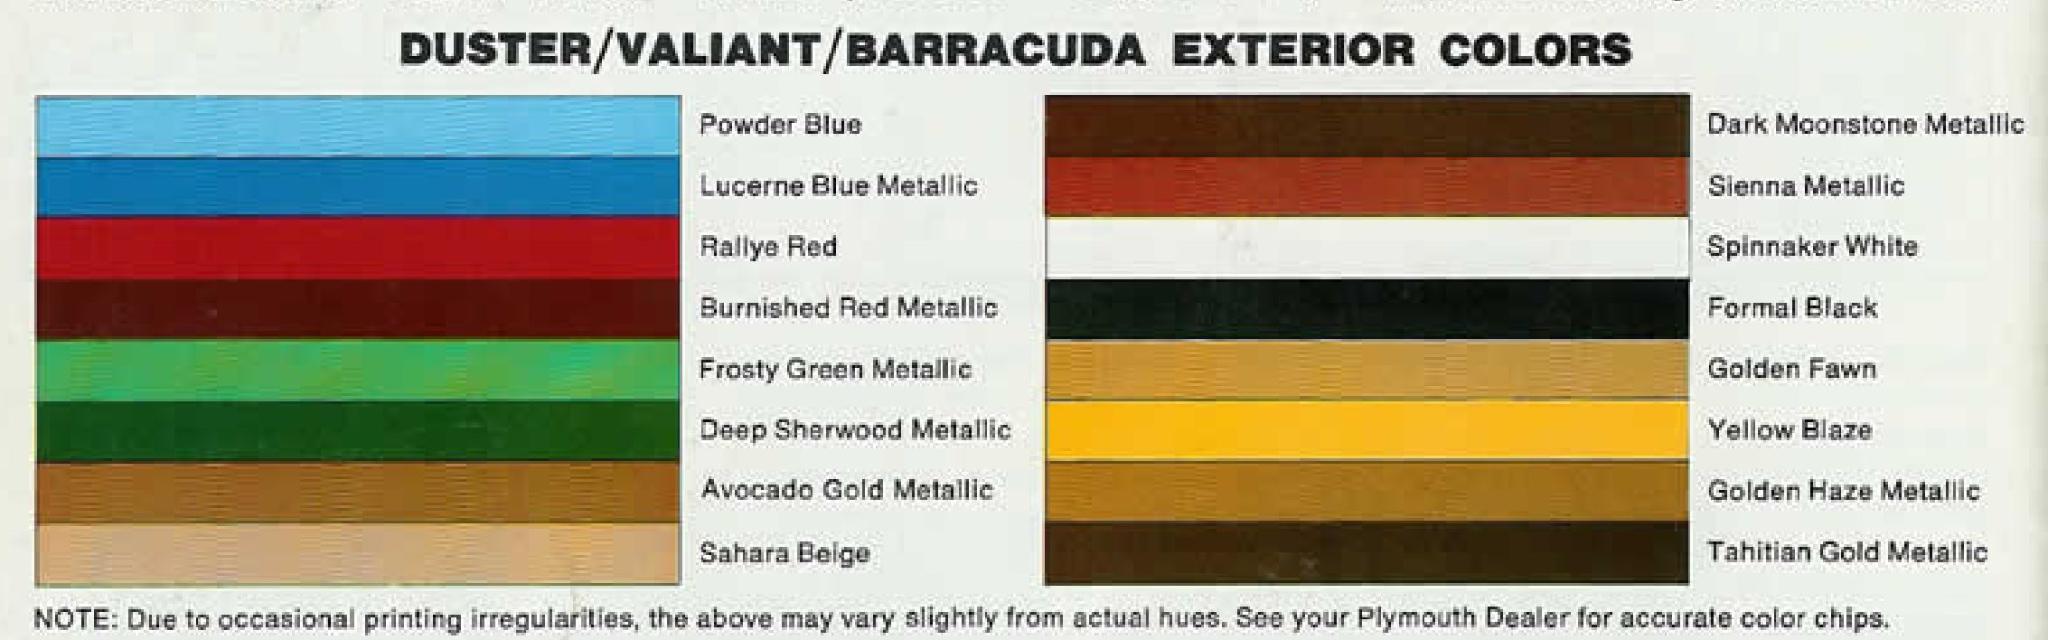 1974 Exterior Colors for Plymouth vehicles 